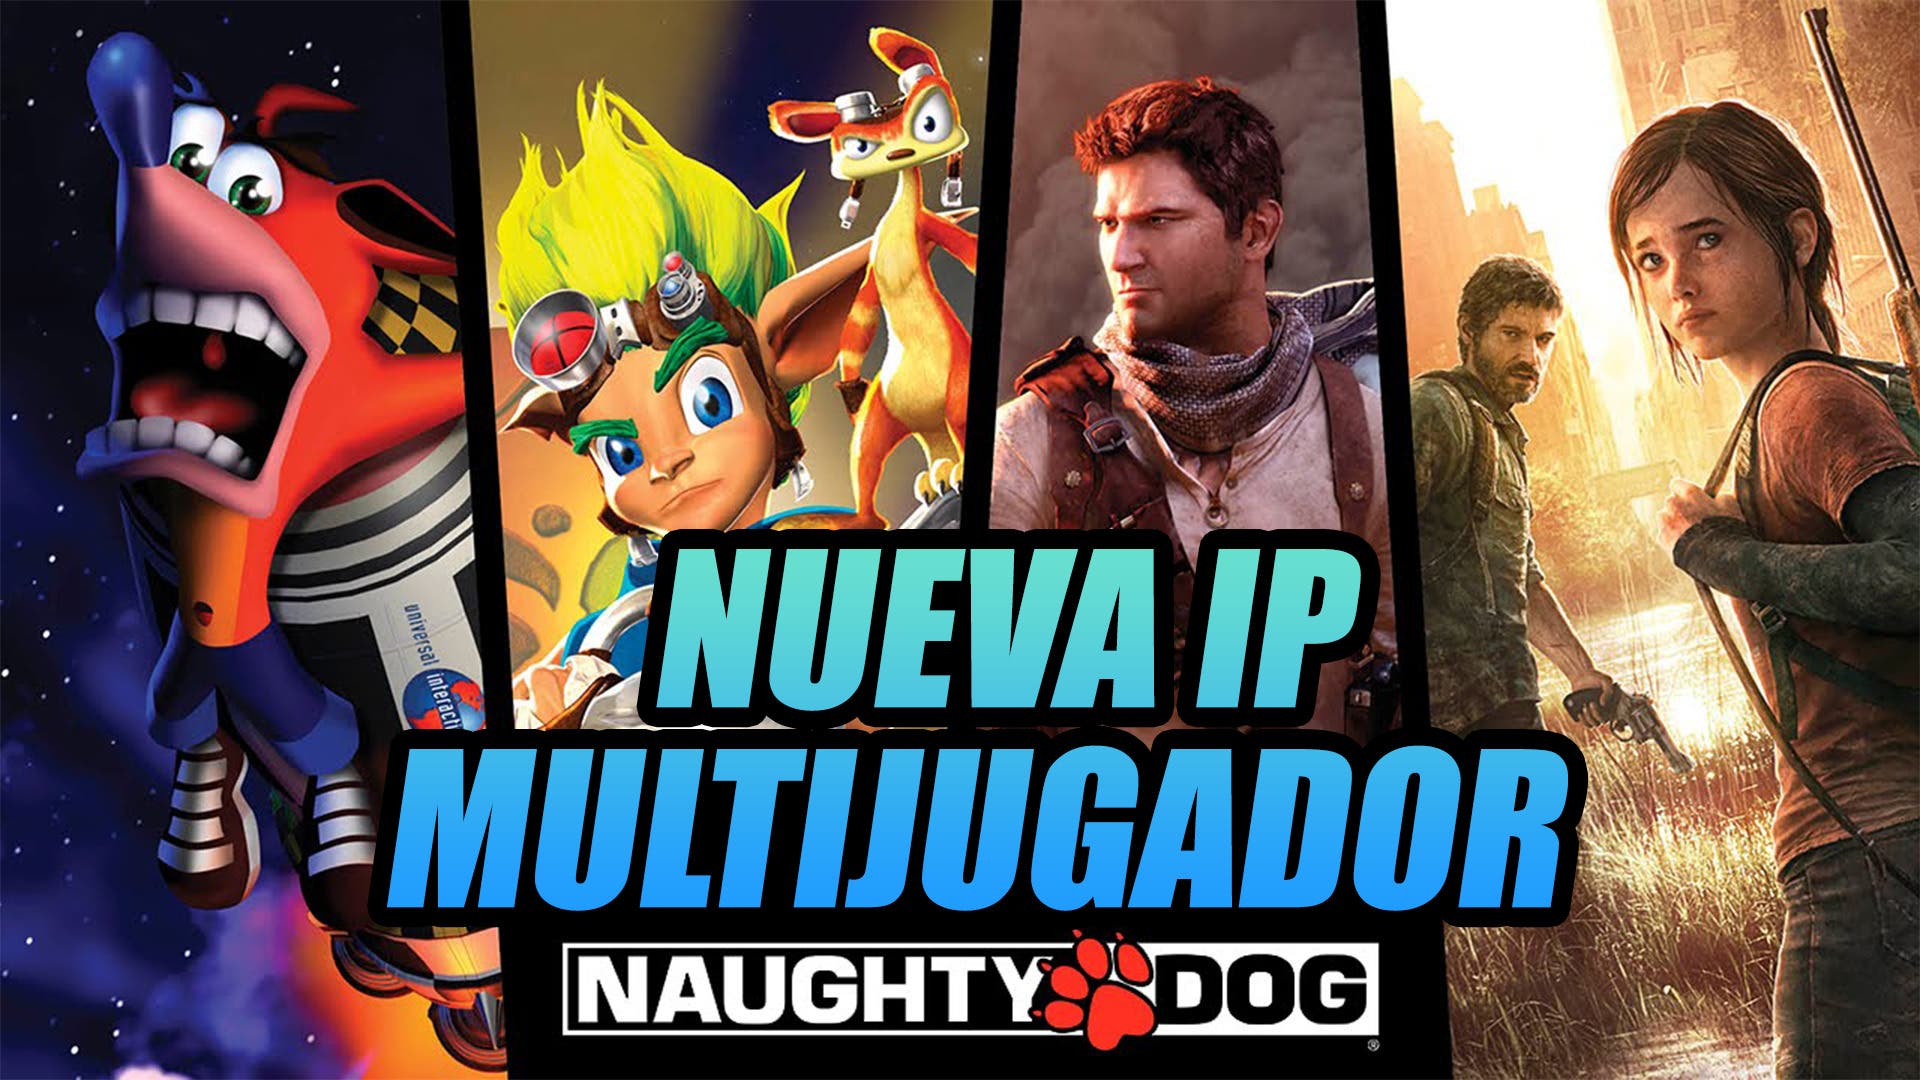 Naughty Dog is looking for people to develop at least two new multiplayer titles